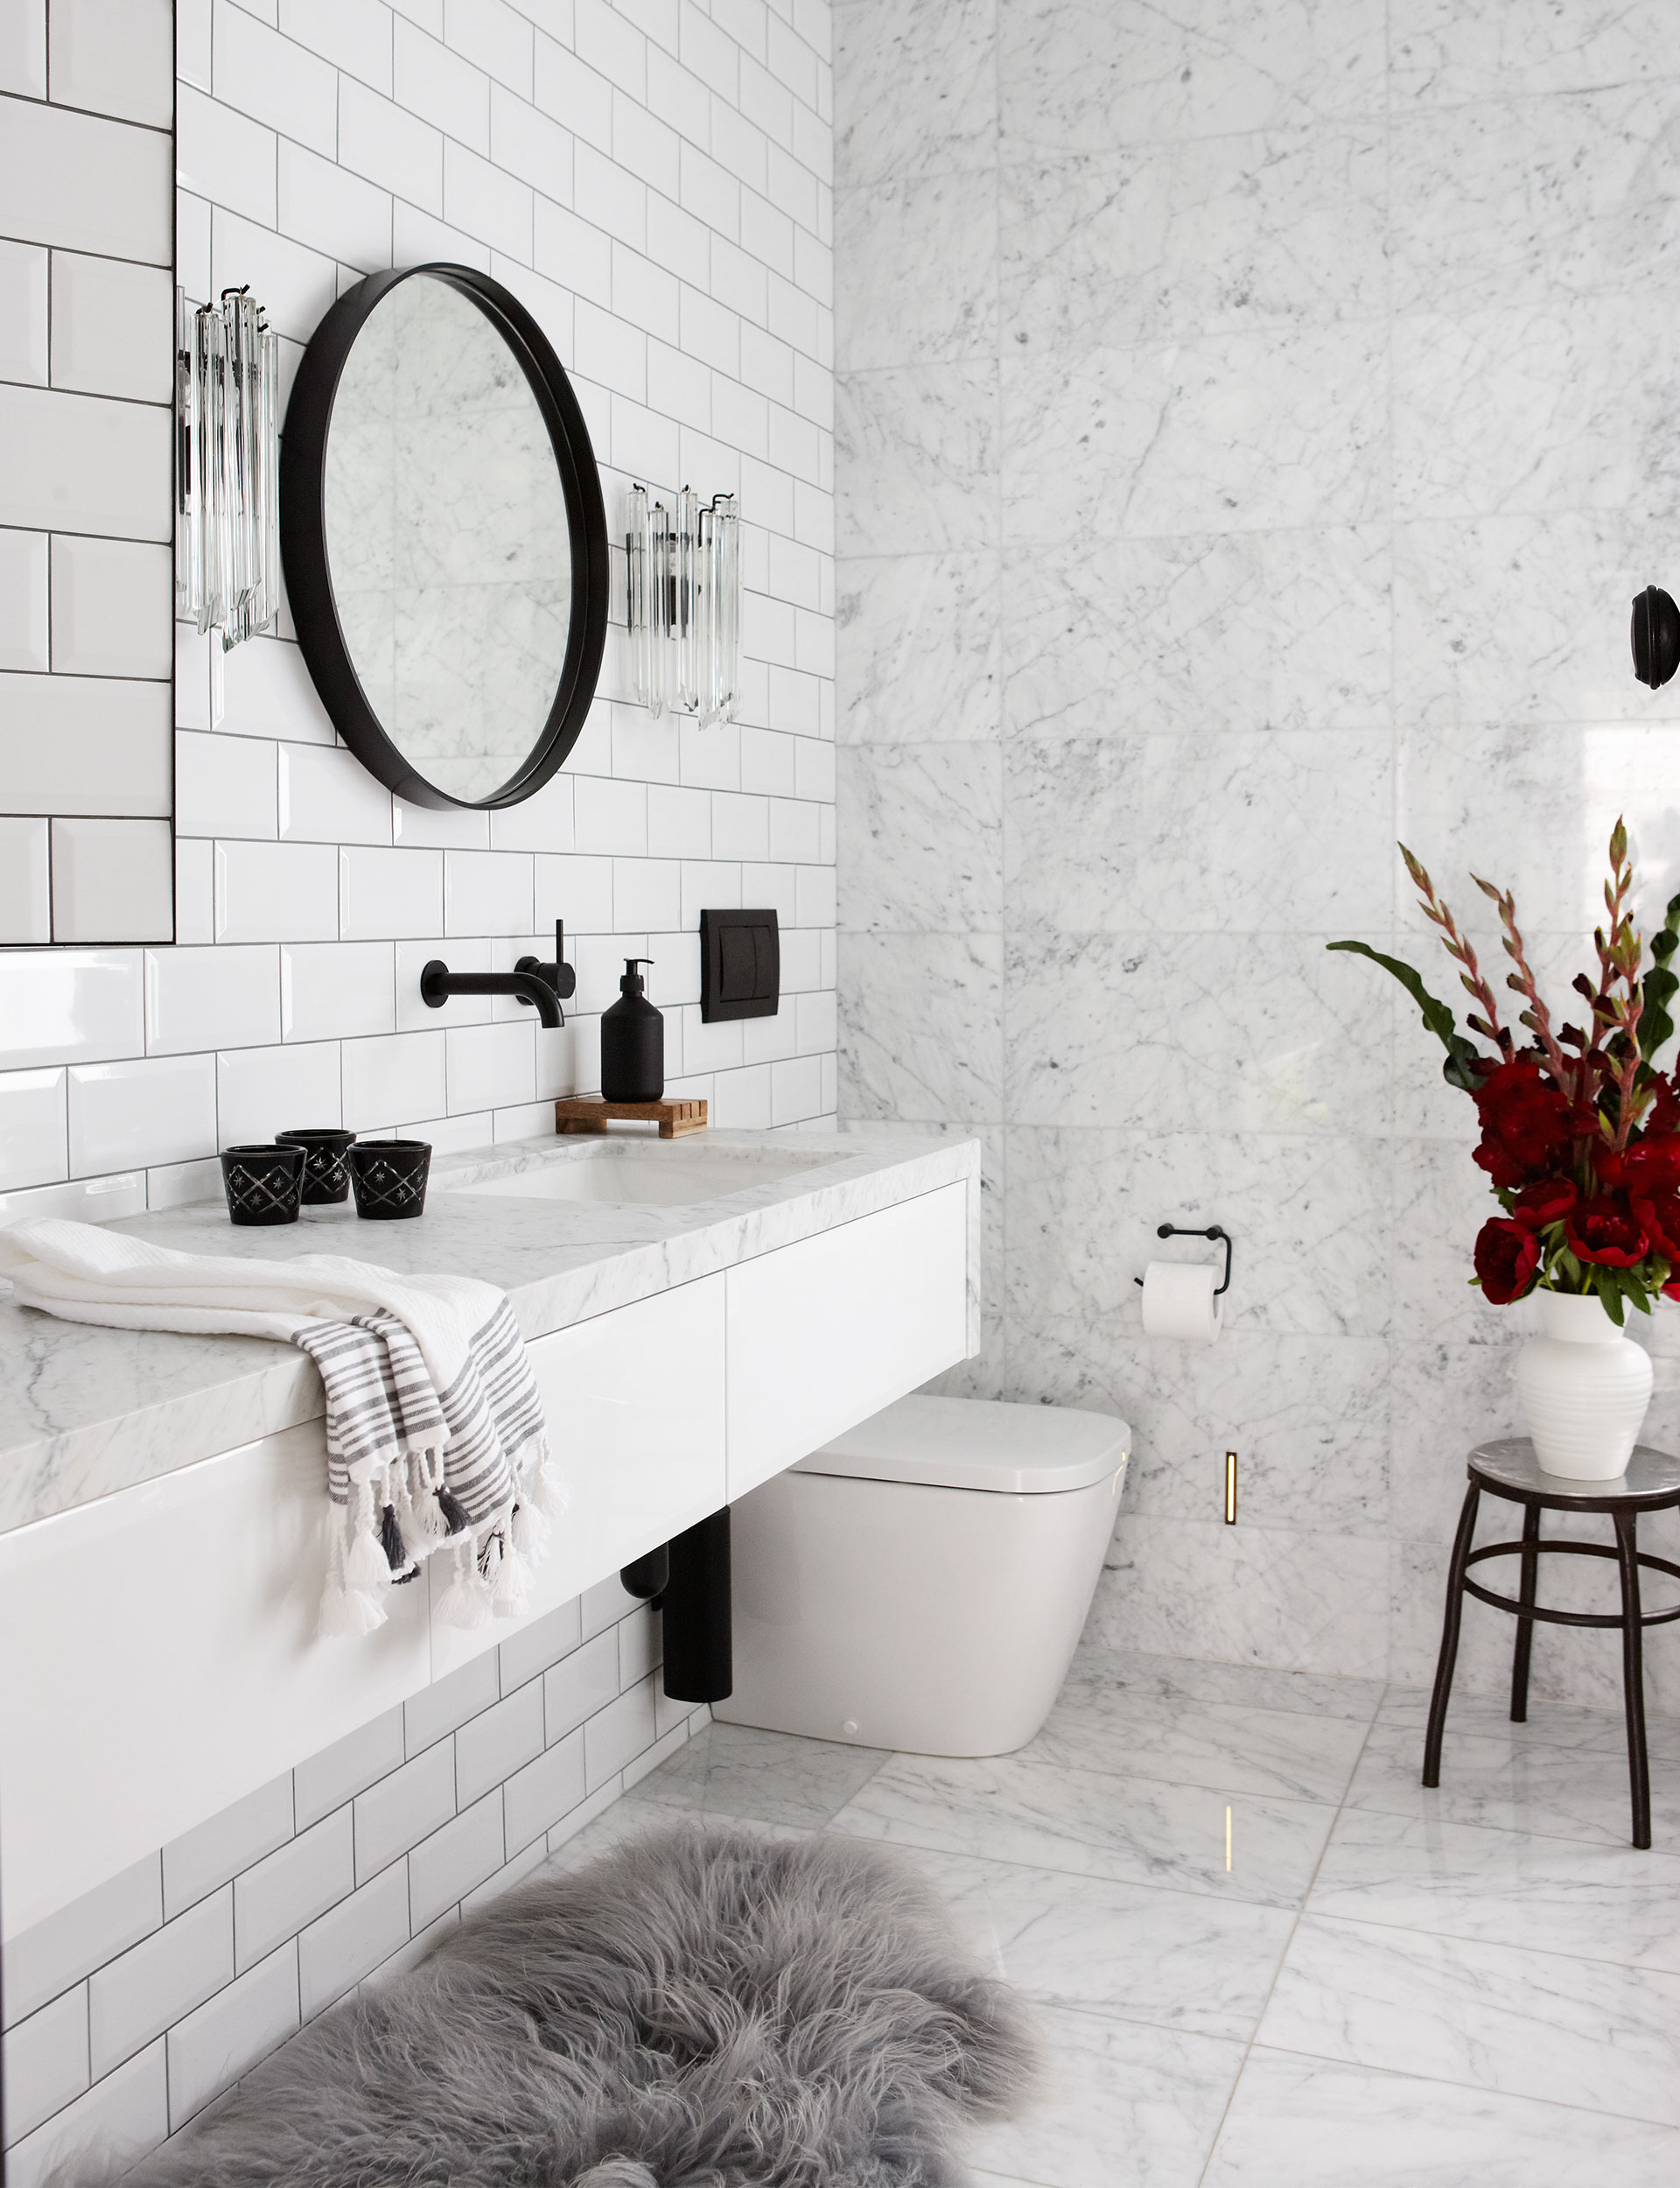 How to make your bathroom feel warmer this winter